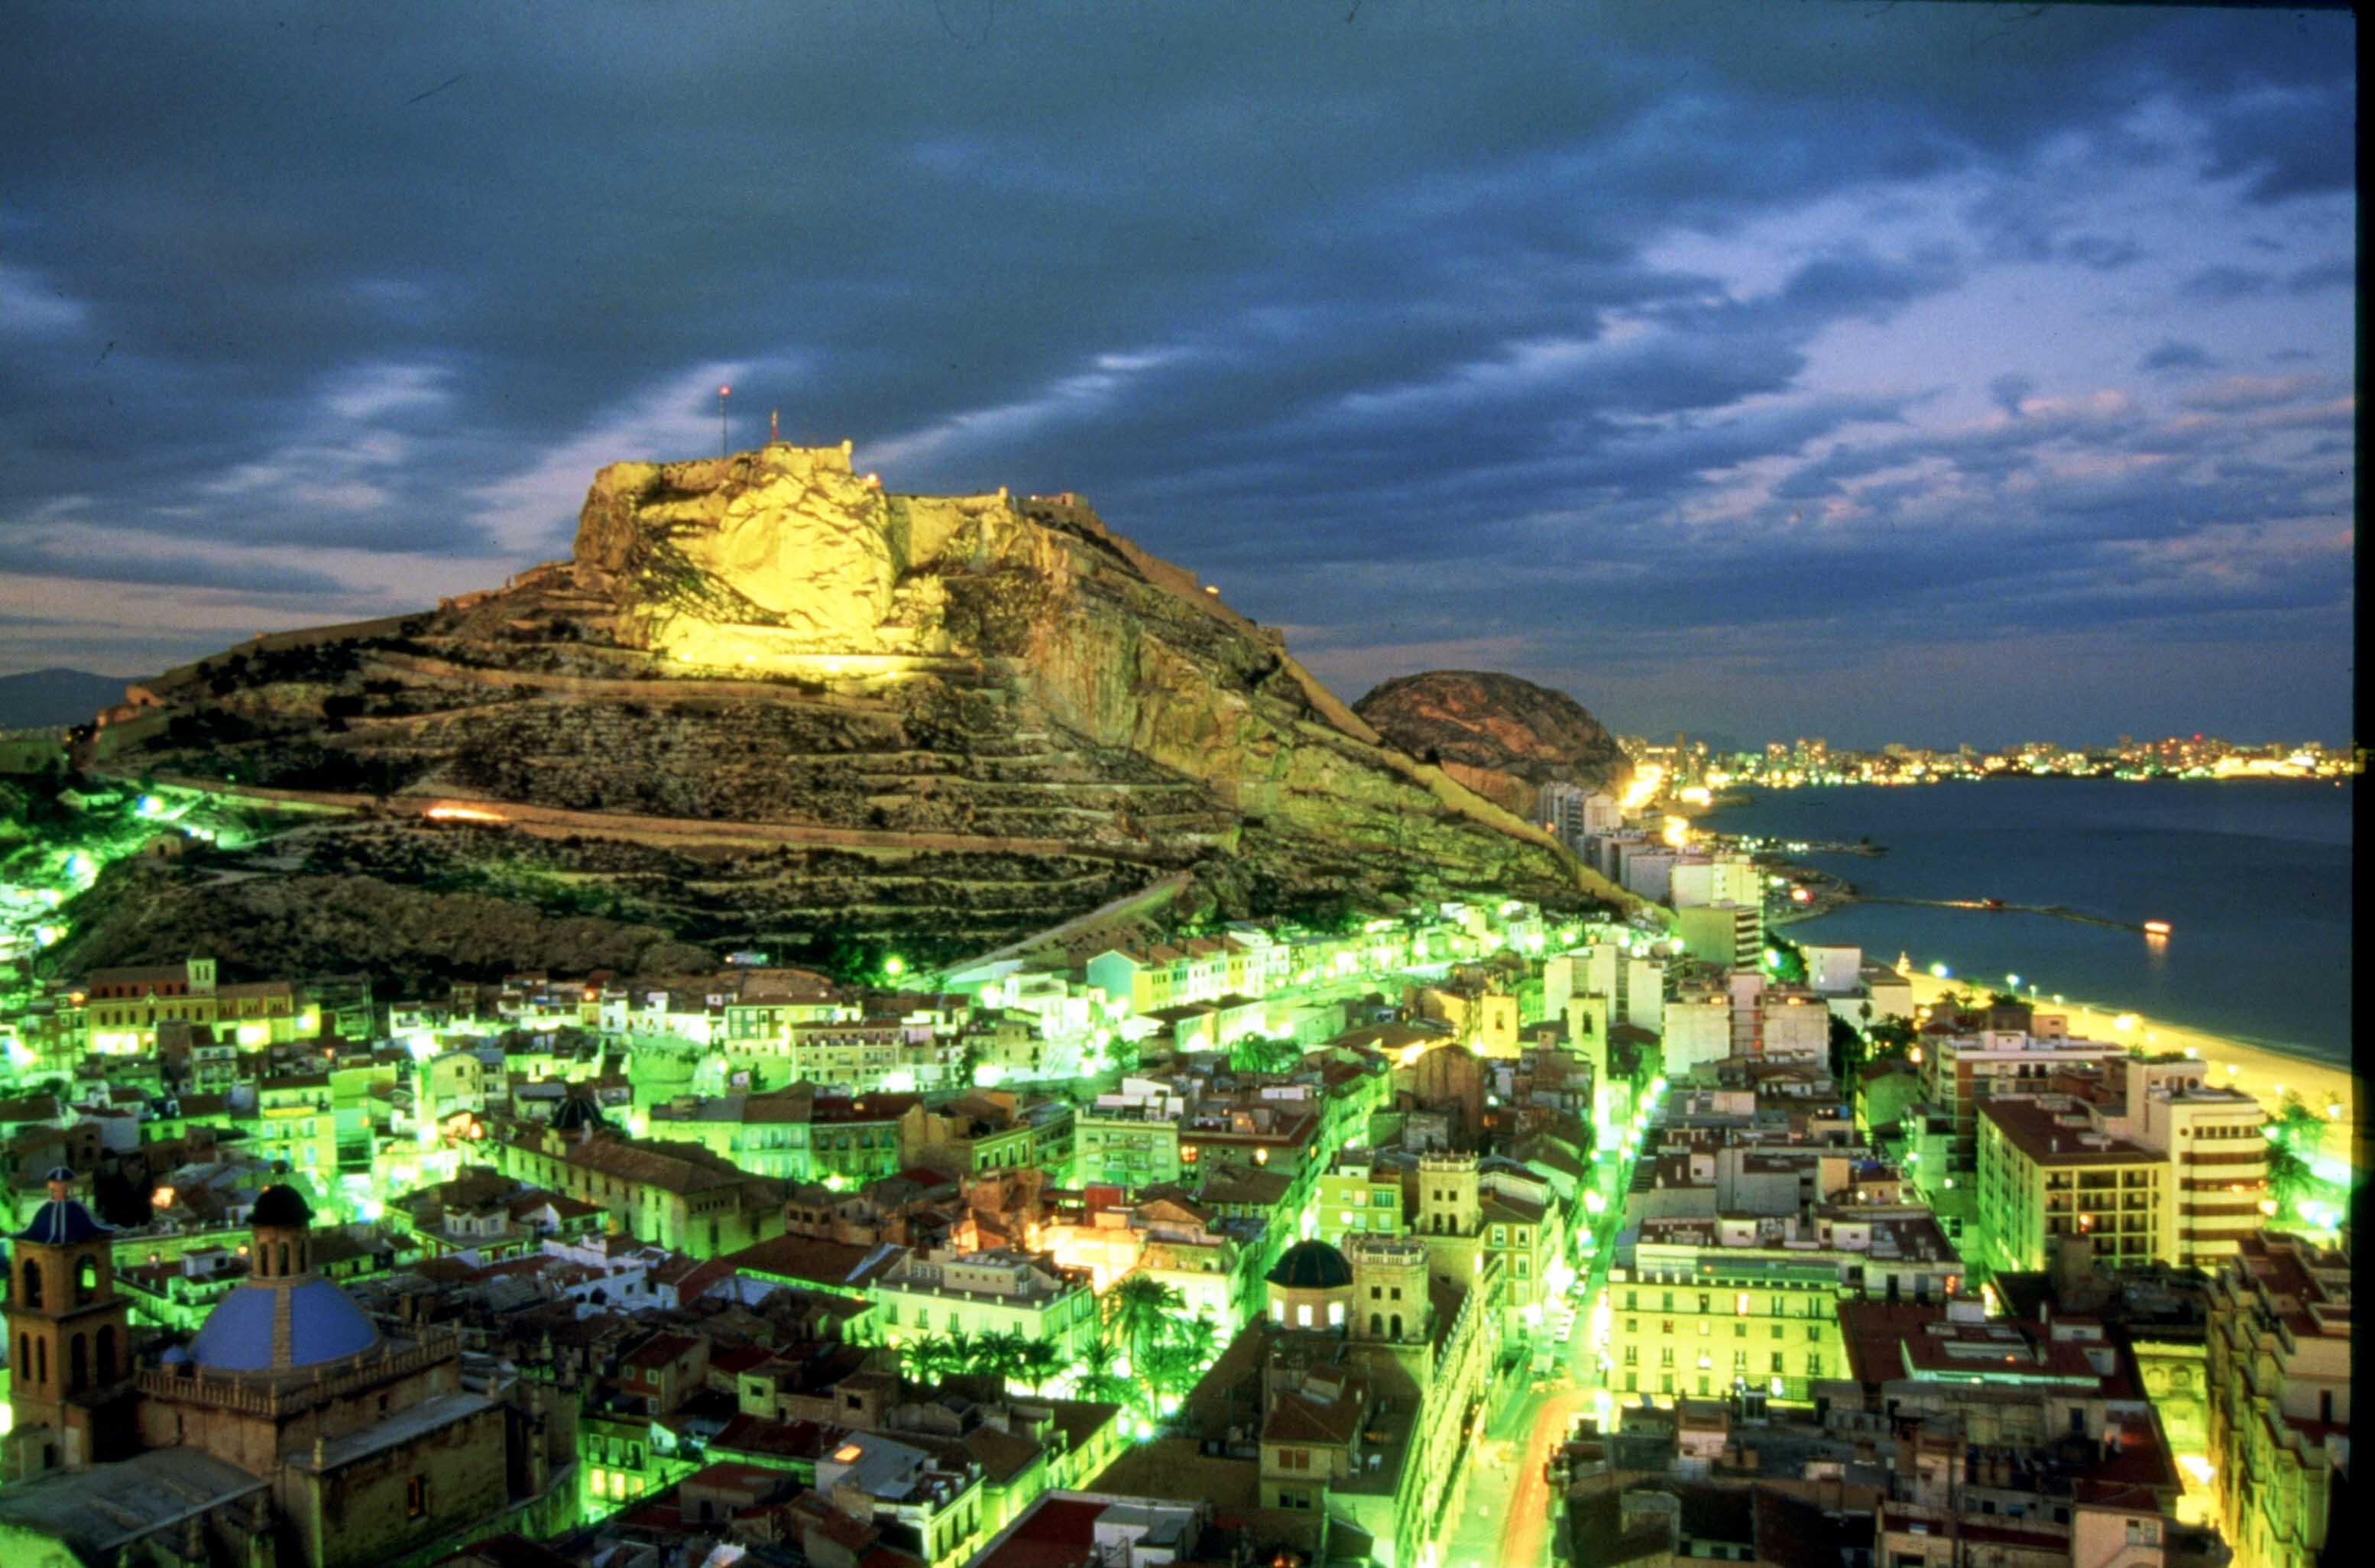 A view of the Old Quarter and Alicante Castle at night in Alicante, Spain.